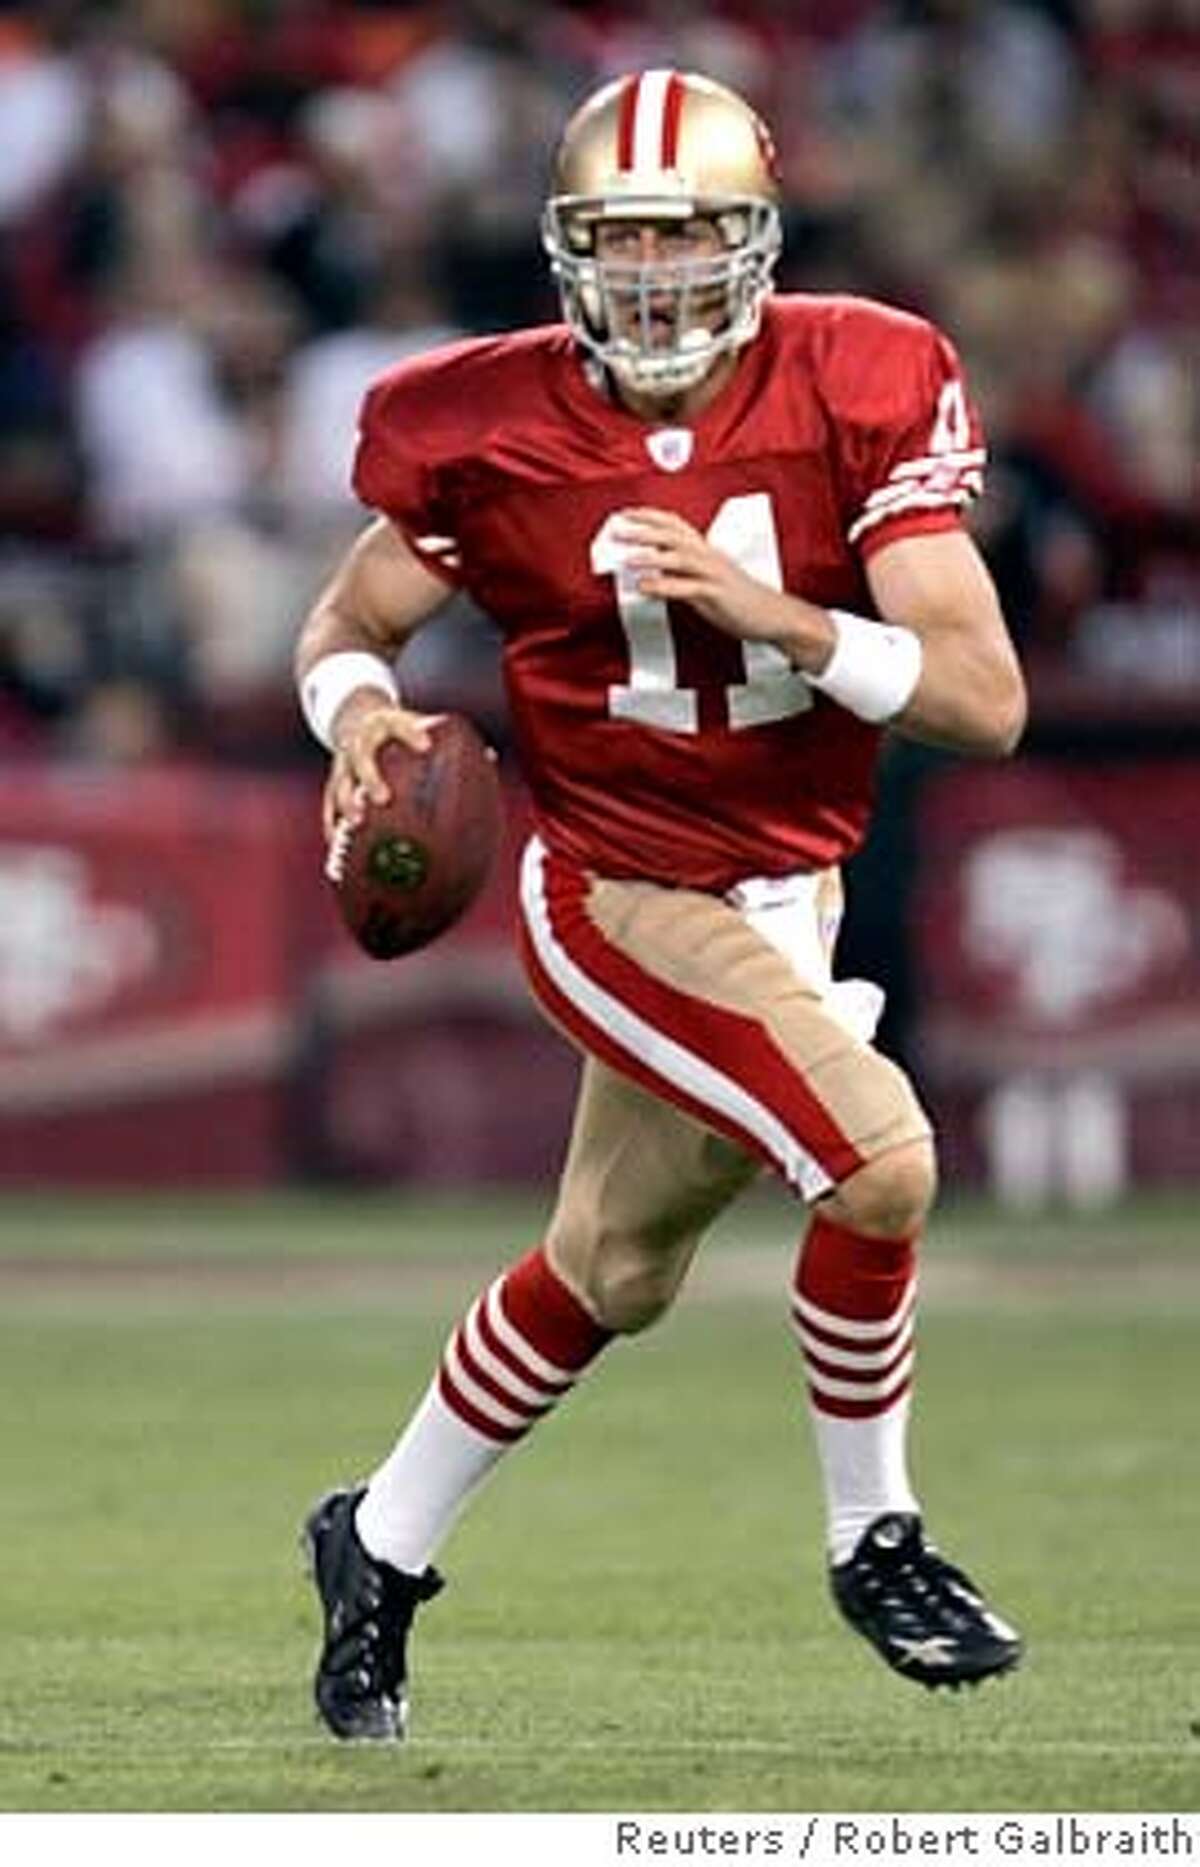 San Francisco 49ers quarterback Alex Smith rolls out to pass in the first quarter against the Arizona Cardinals during their NFL football game in San Francisco, California September 10, 2007. REUTERS/Robert Galbraith (UNITED STATES) 0